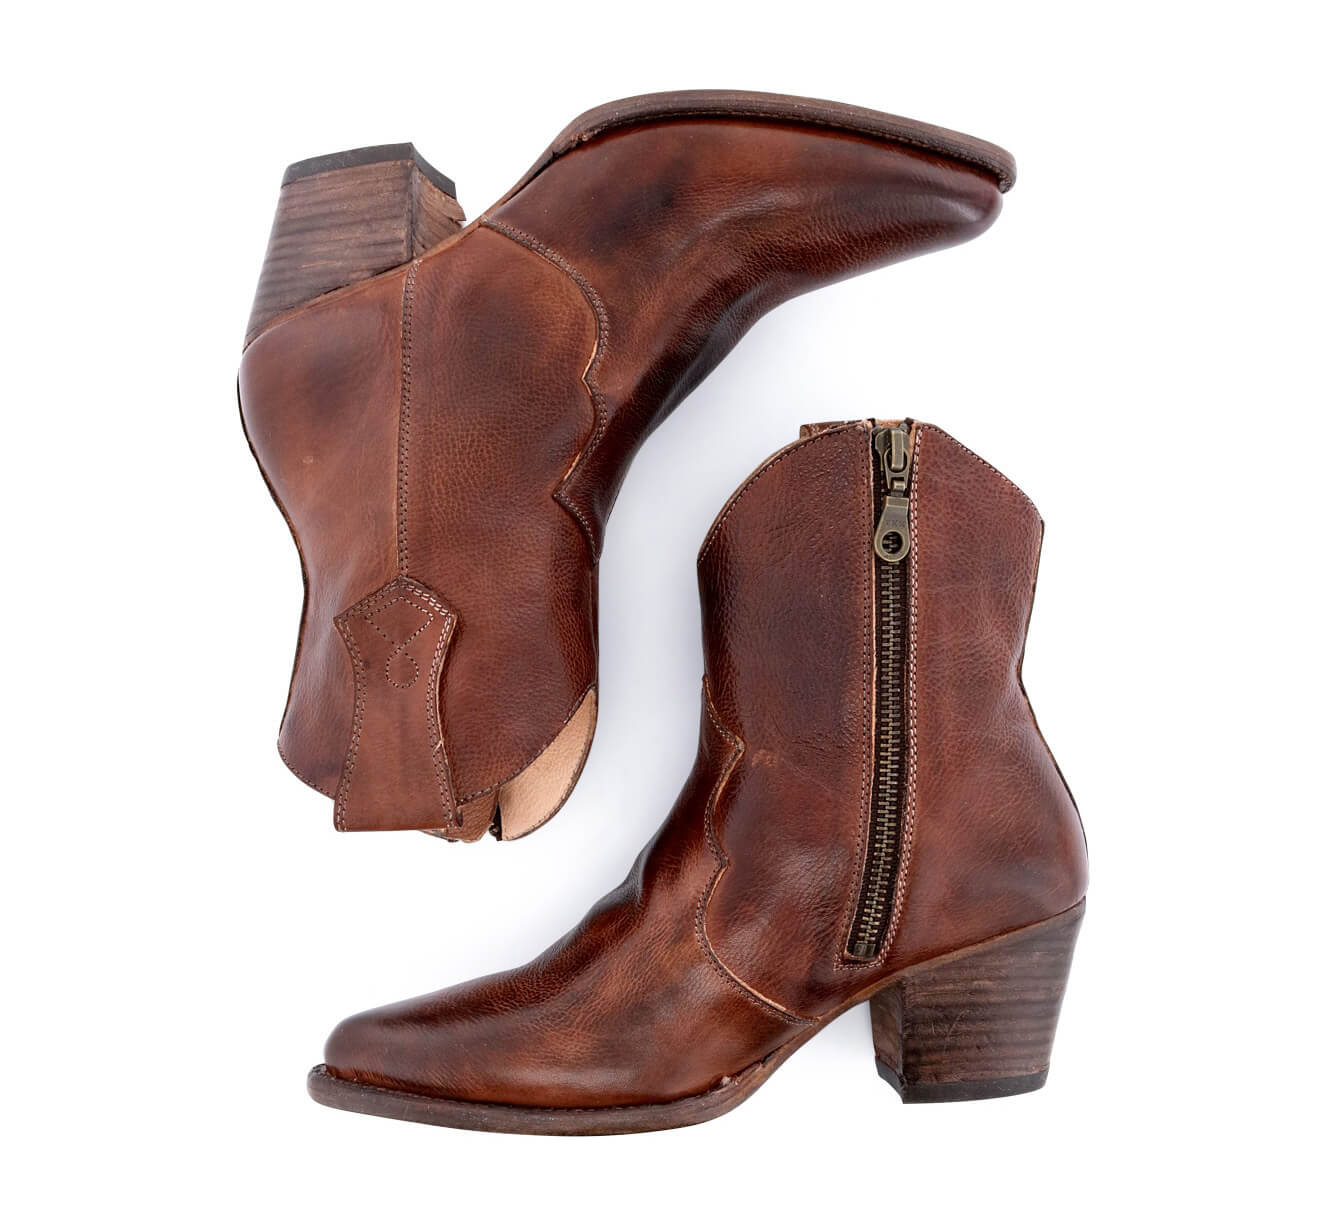 A pair of Oak Tree Farms Baila cowboy boots with zippers on the sides.